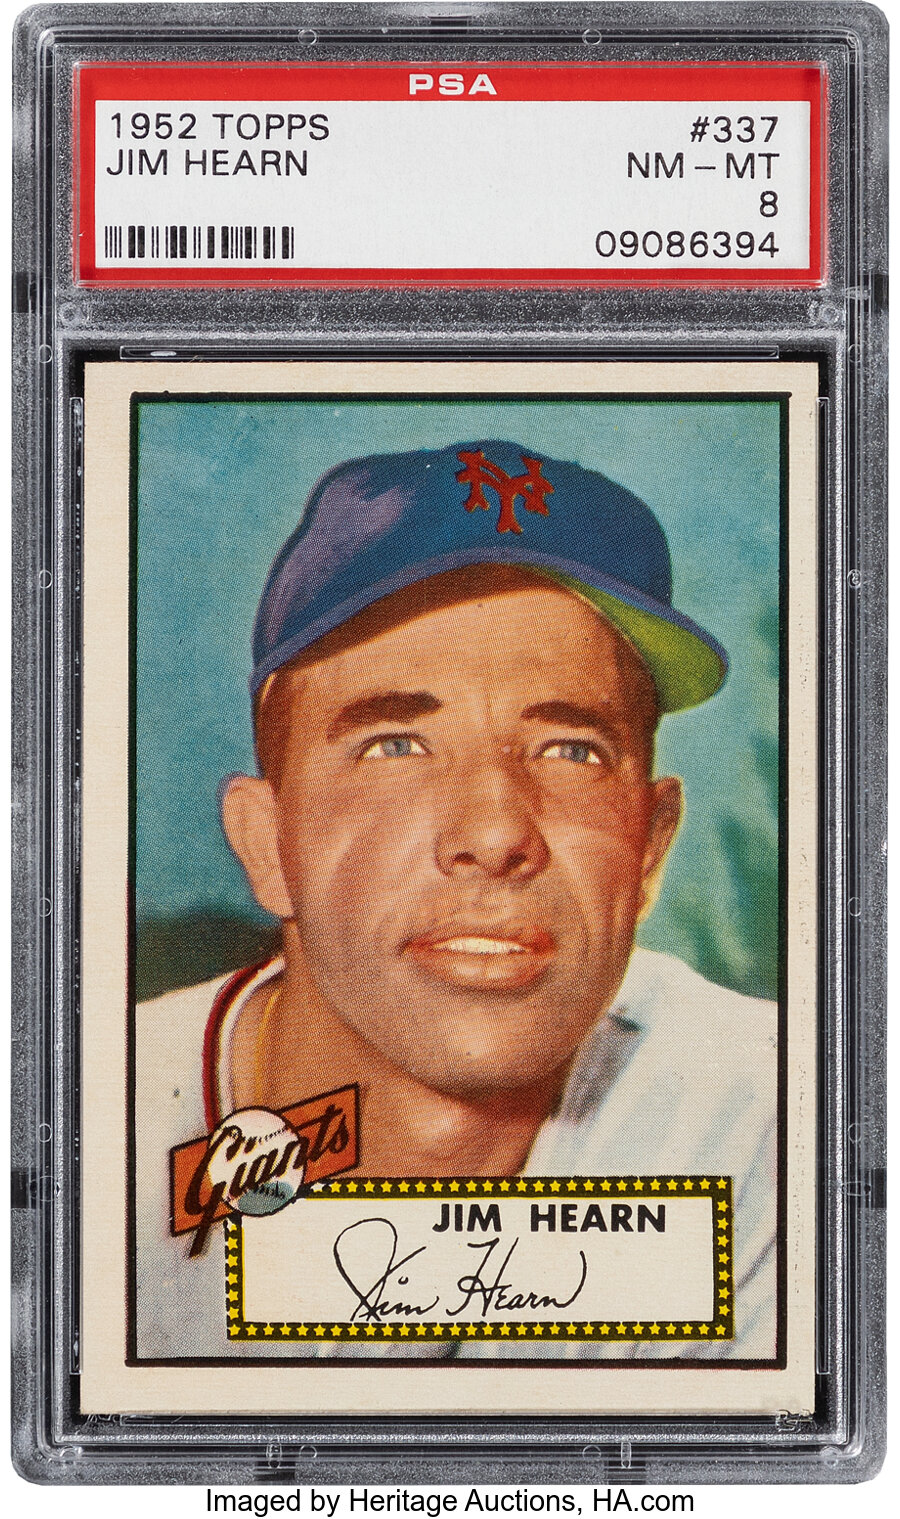 1952 Topps Jim Hearn #337 PSA NM-MT 8 - Only One Higher